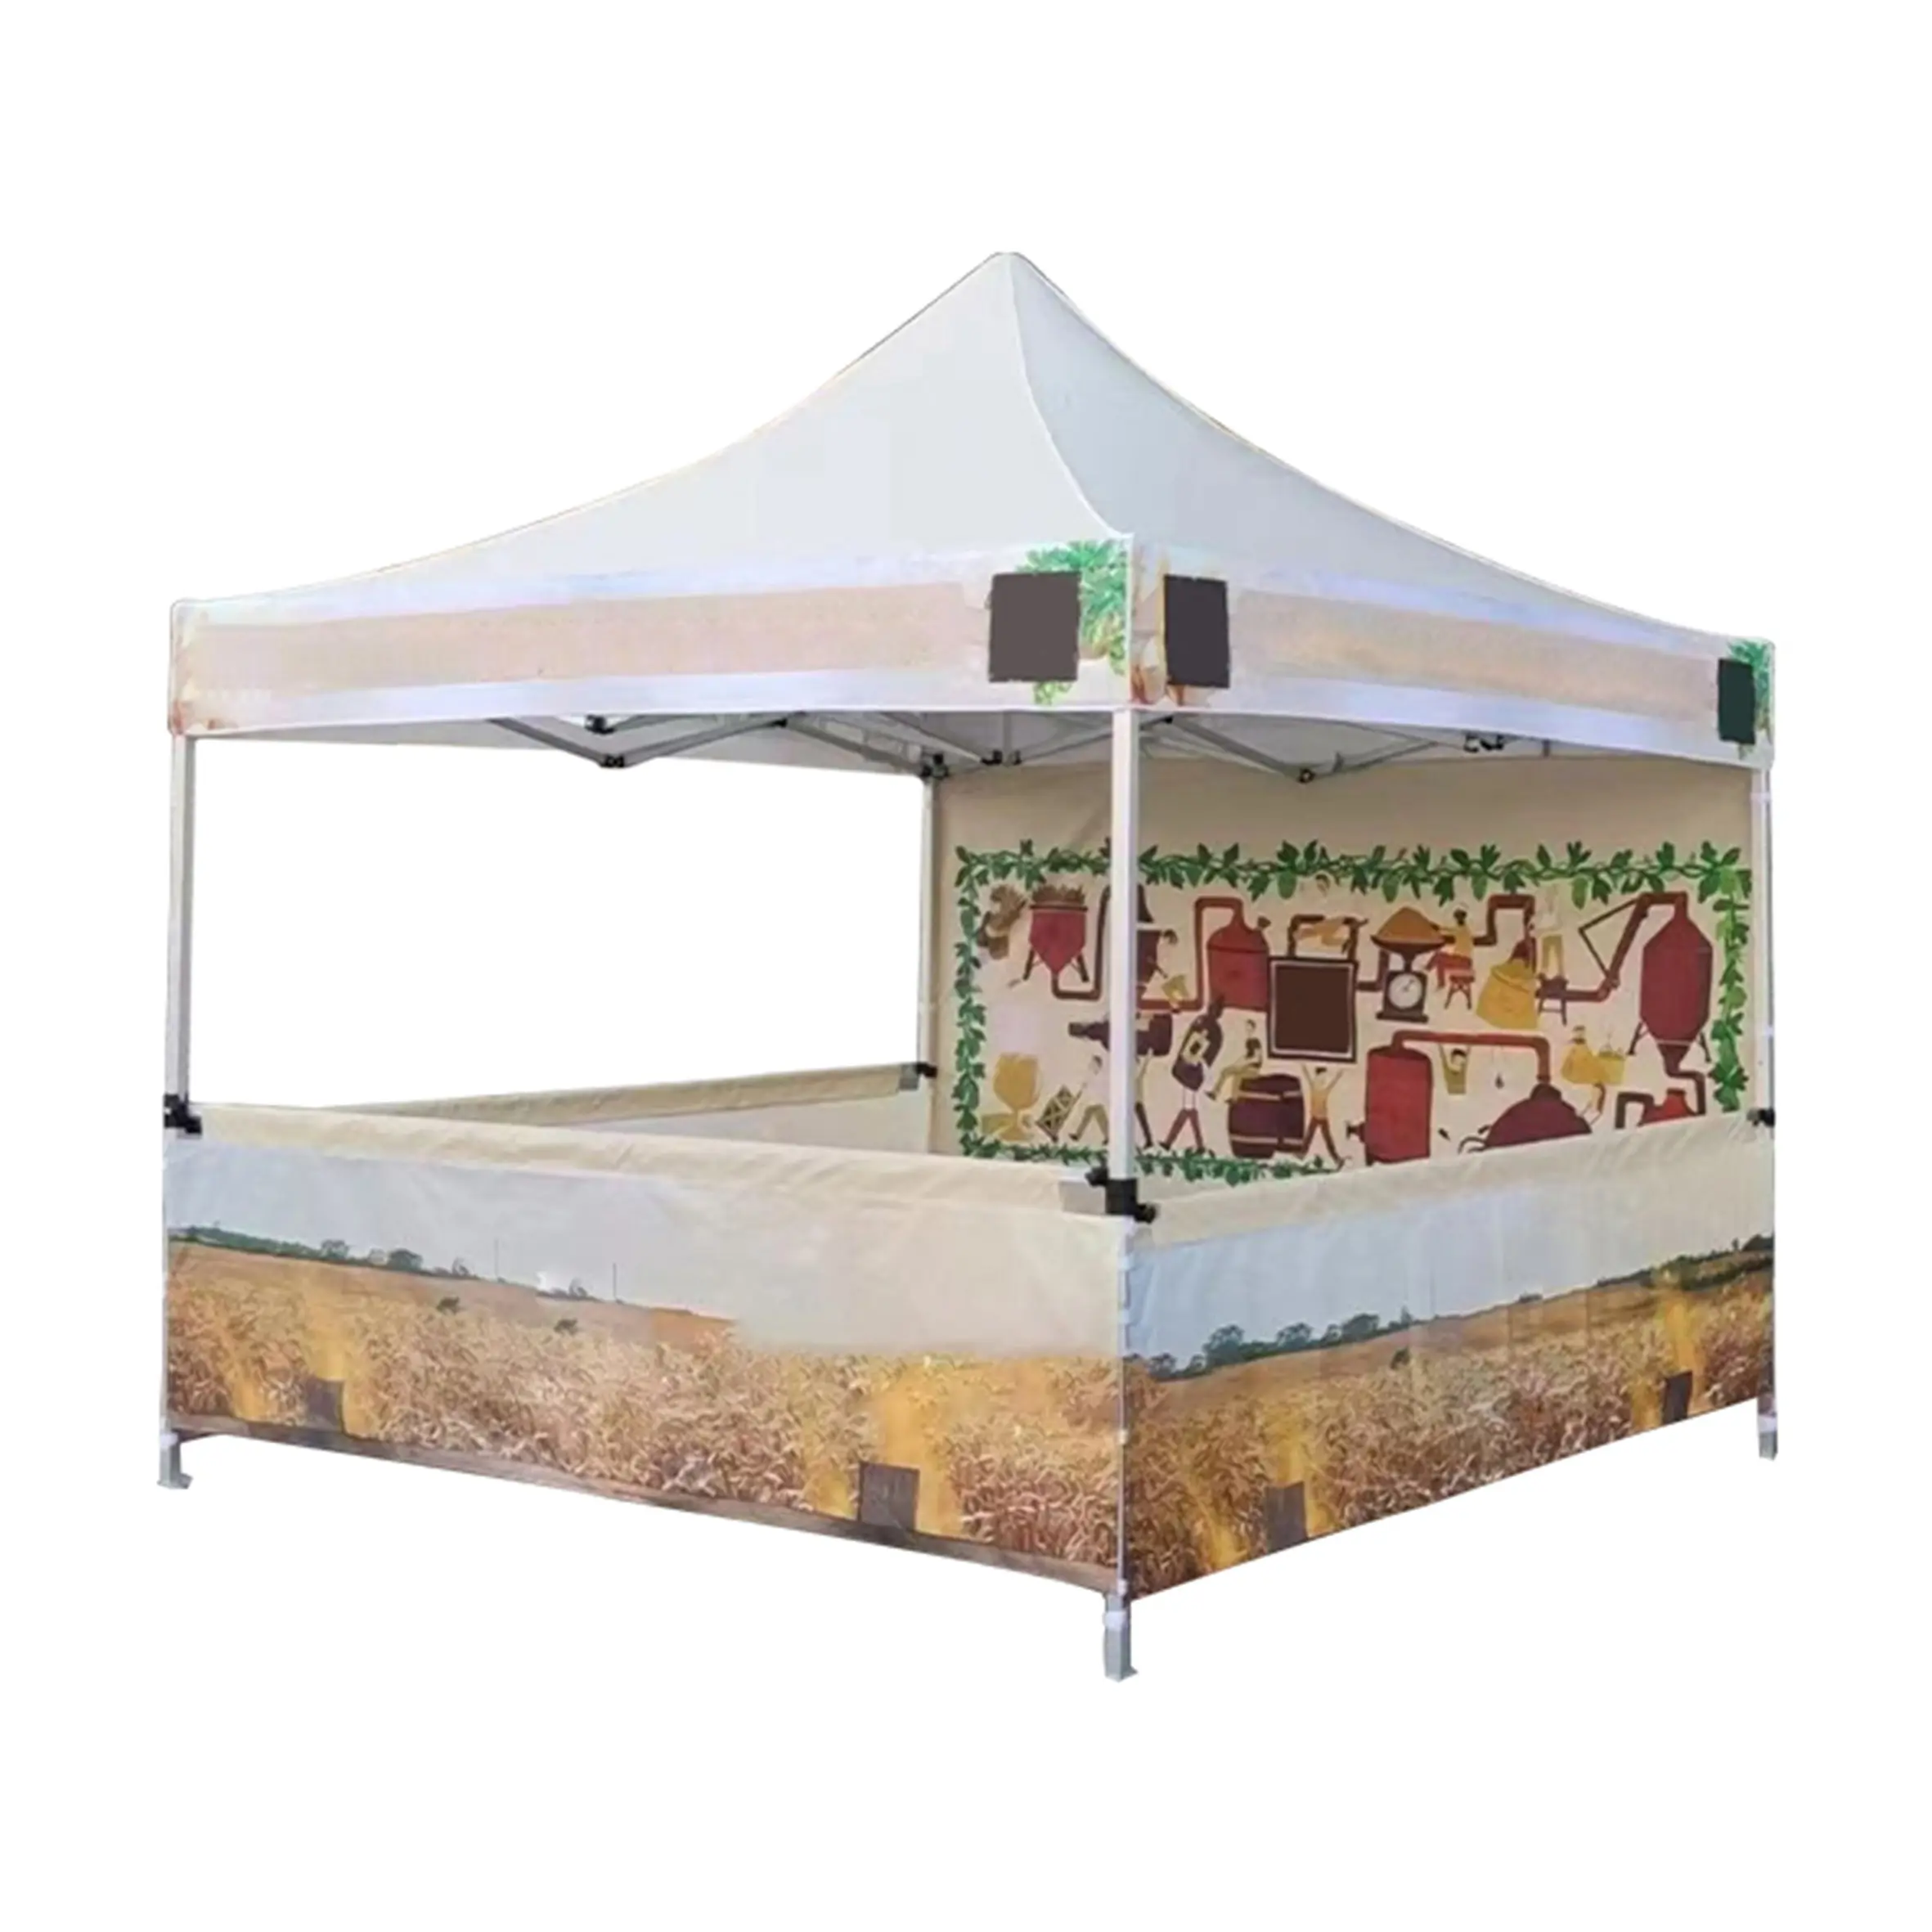 Hot Sale 33 Beach Shade Tents,Perfect for Outdoor Weddings and Garden Events and Waterproof/